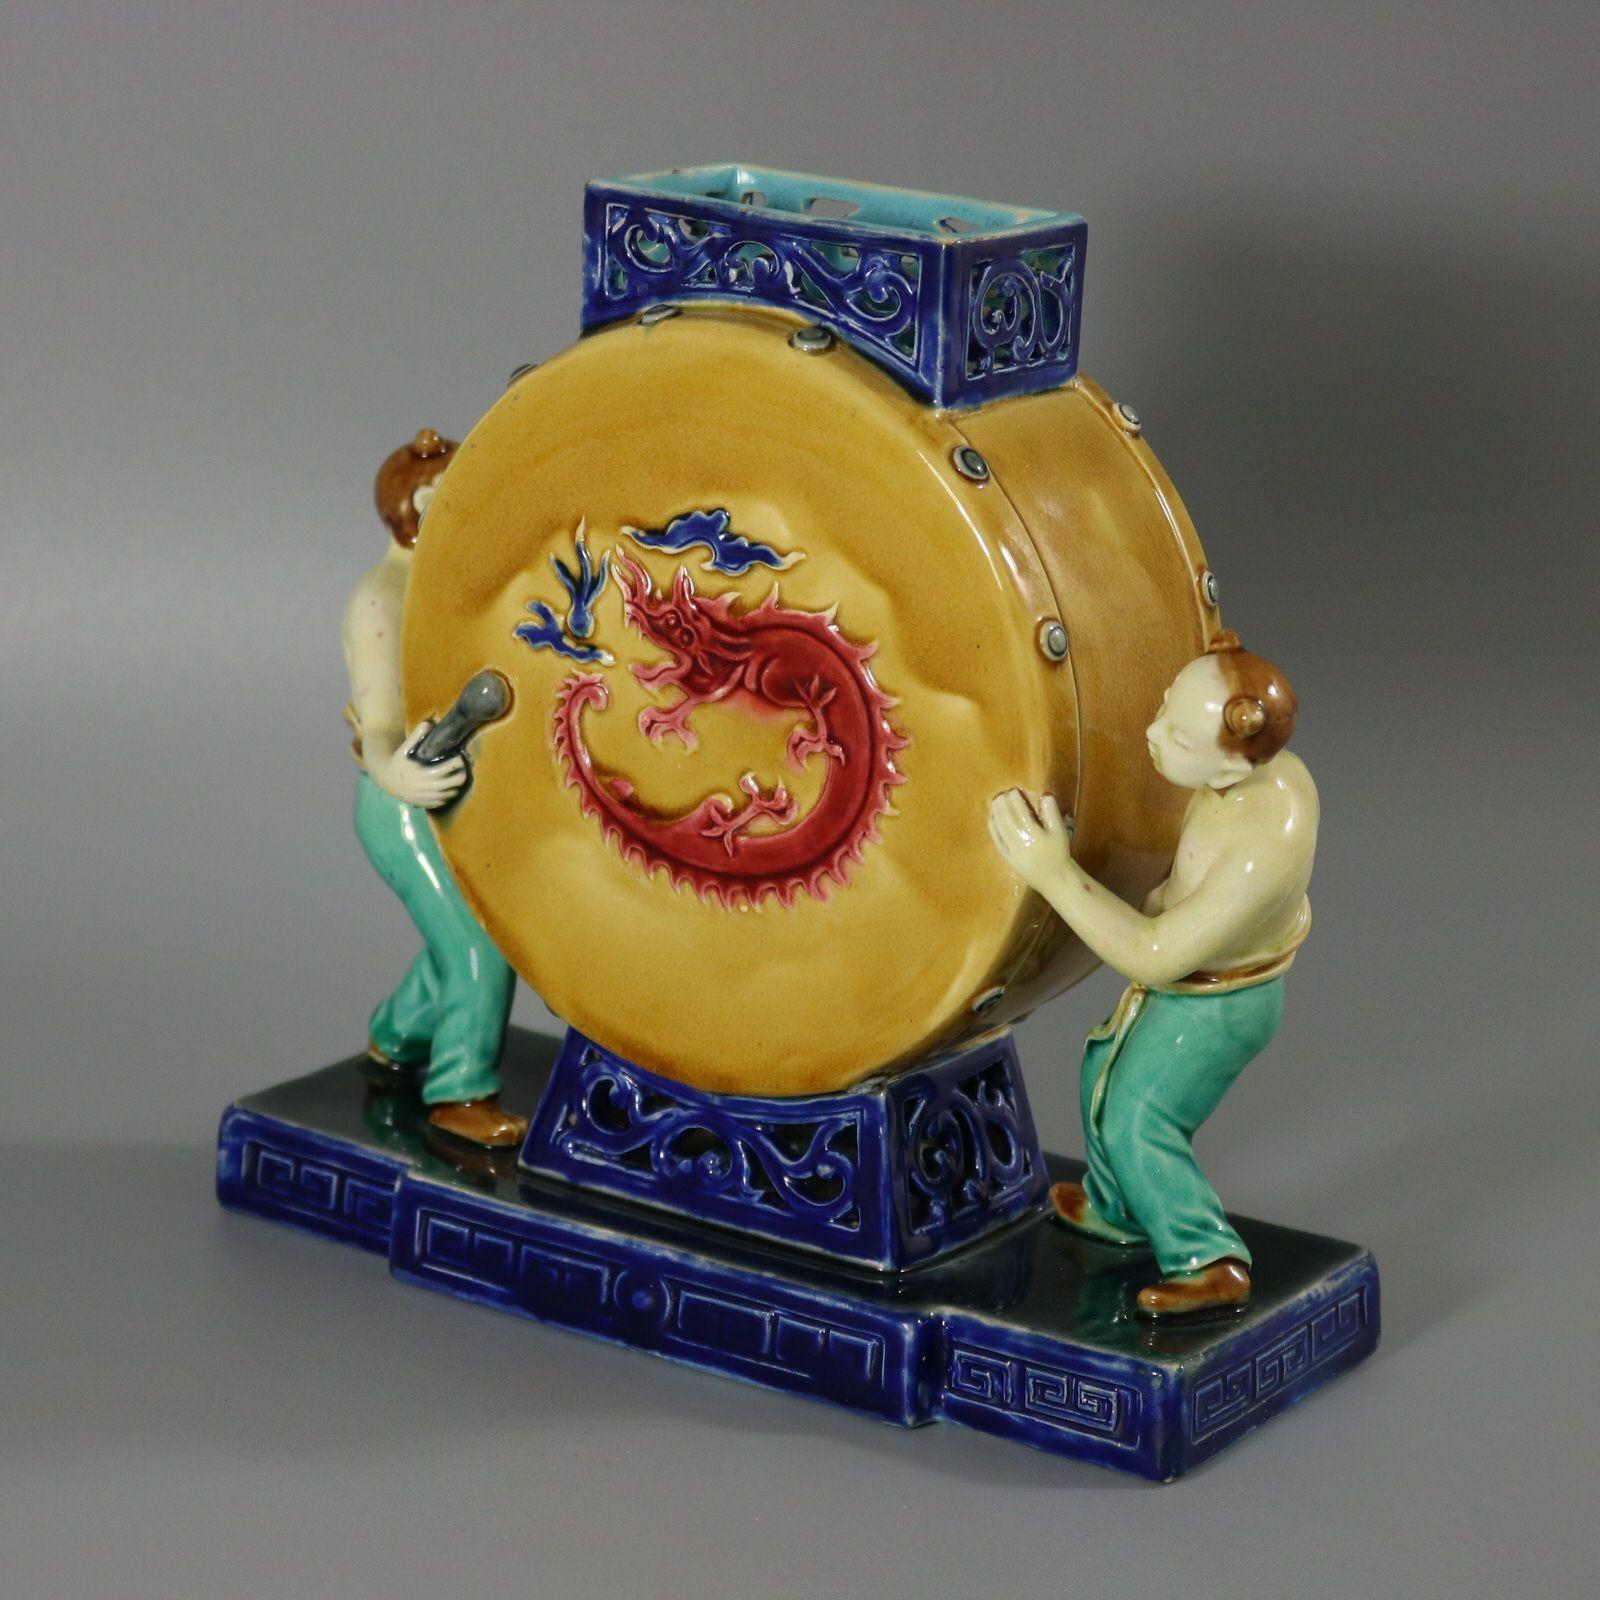 Minton Majolica vase which features a large drum with Chinese drummers stood either side. The drum has dragons on both faces. Intricate cut-out rim and base. Colouration: light brown, red, cobalt blue, are predominant. The piece bears maker's marks